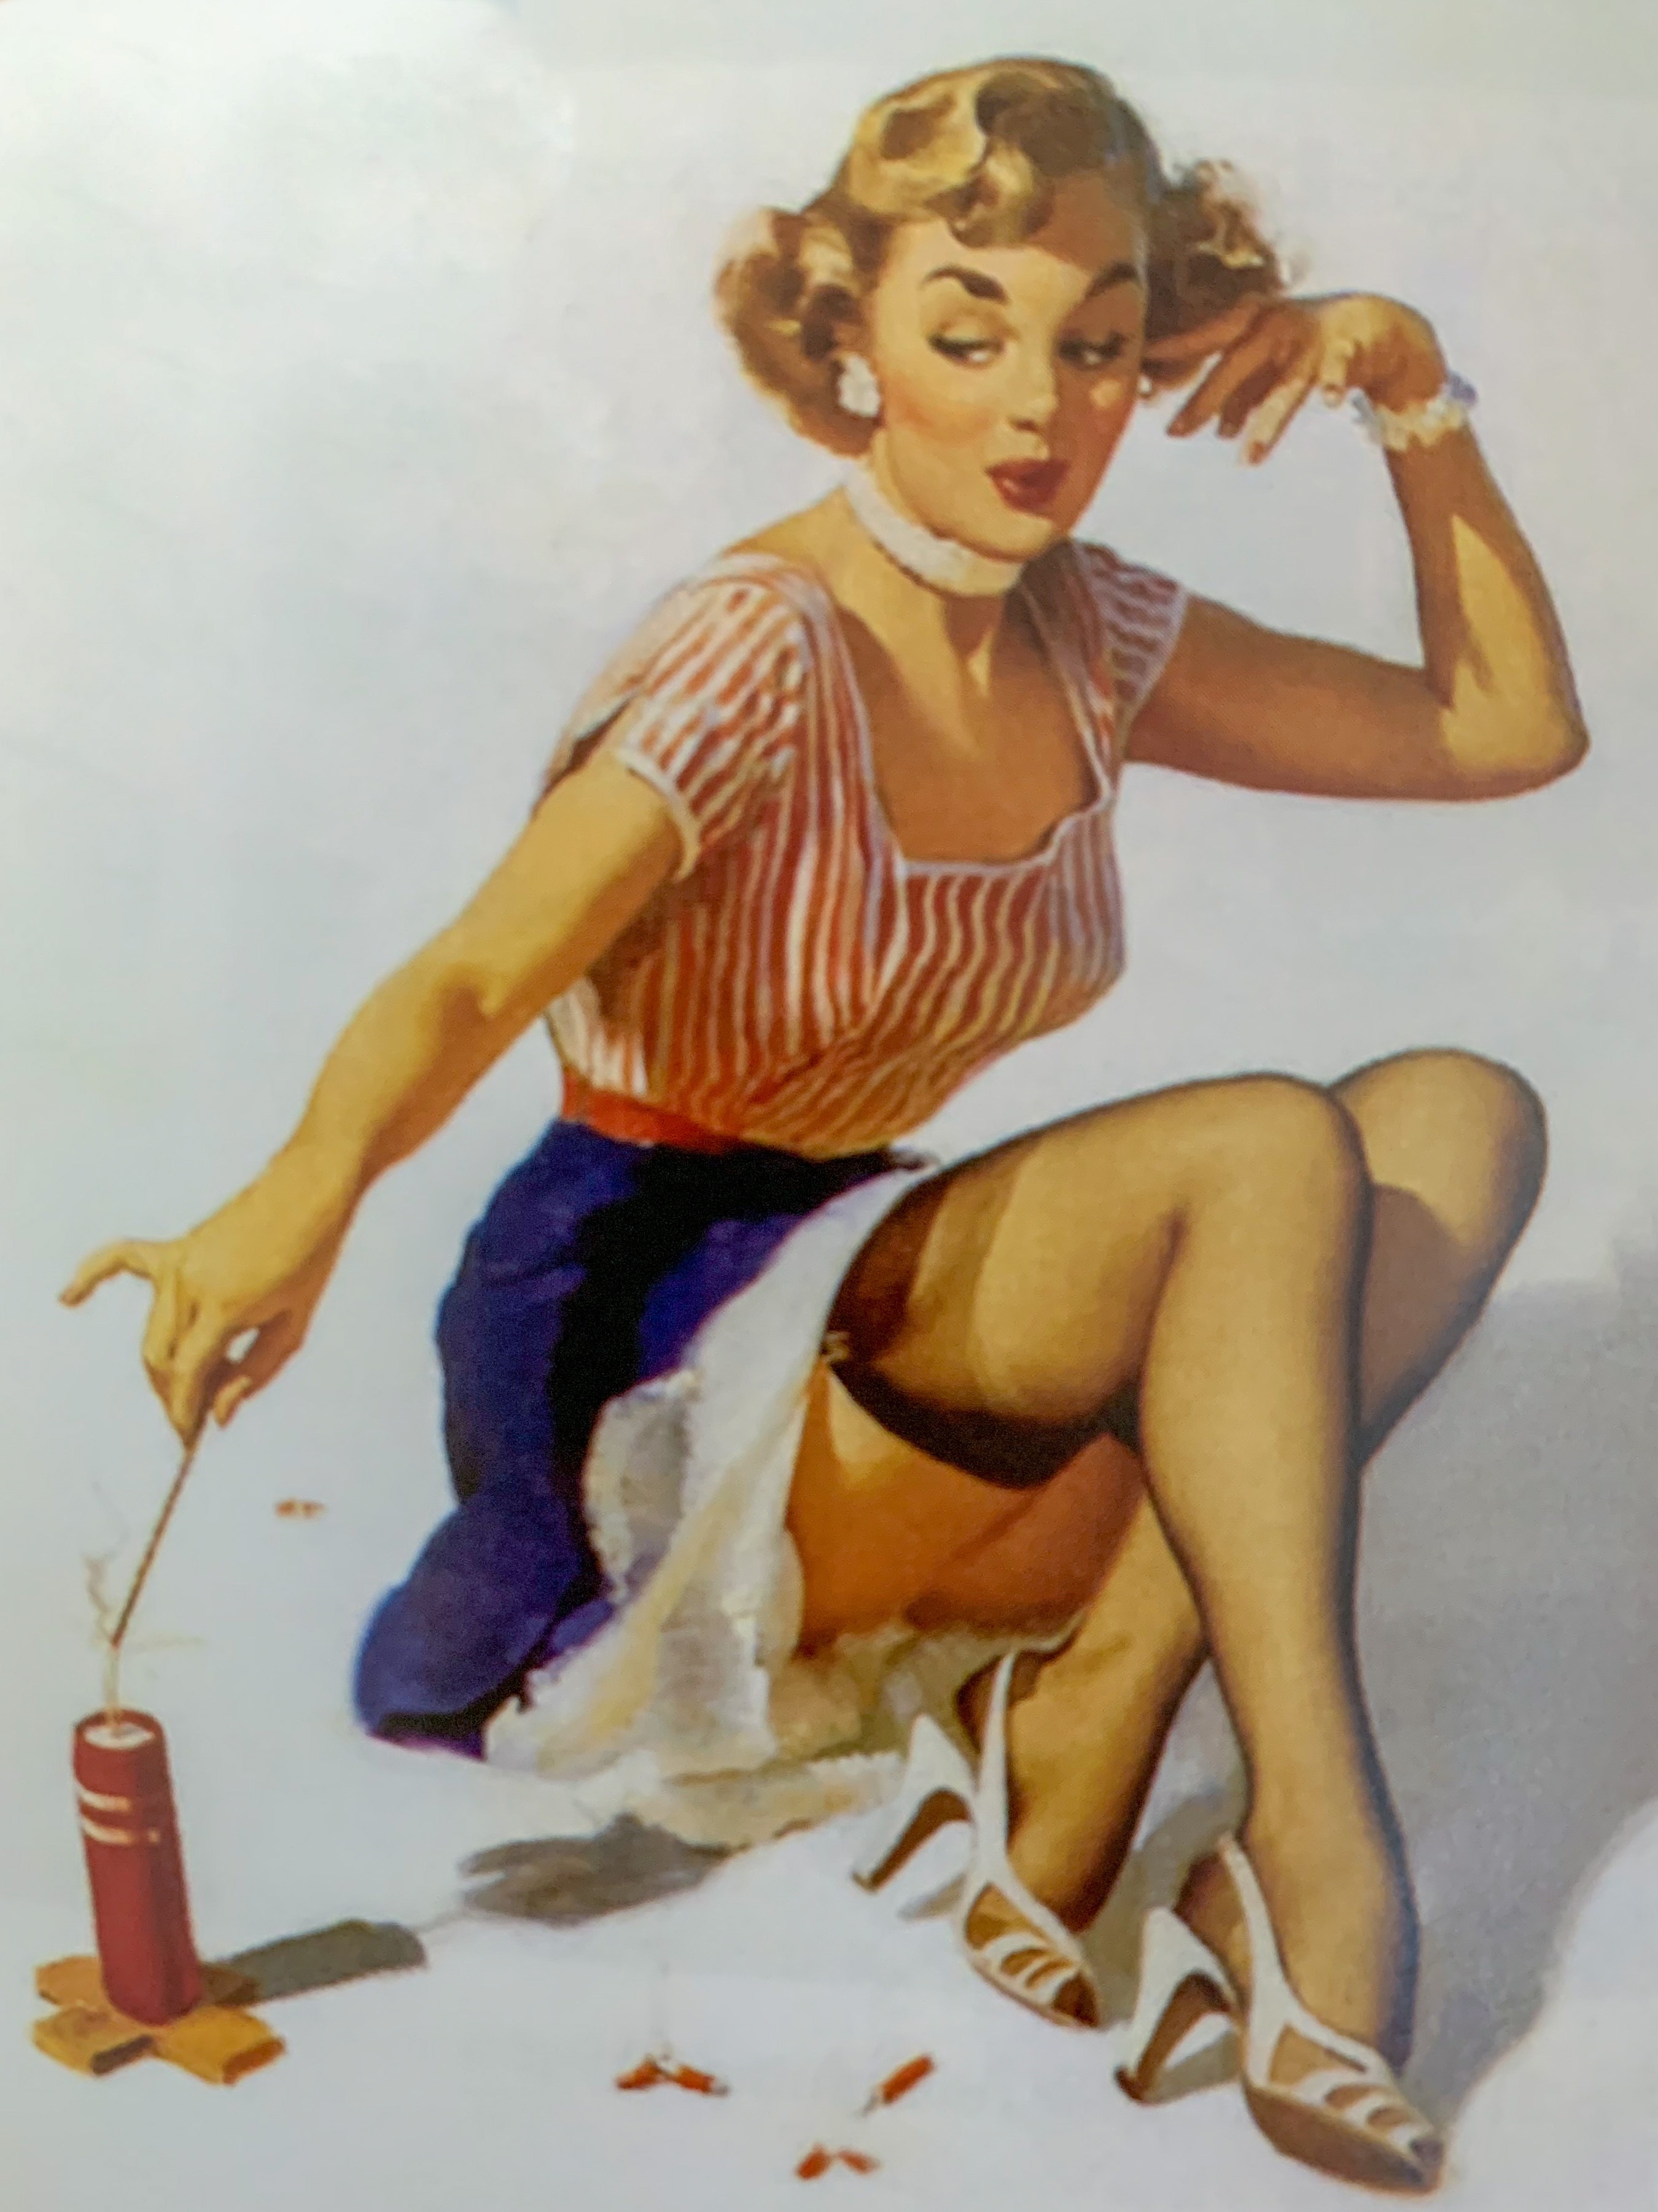 Marilyn Monroe in a USA poster for firecrackers